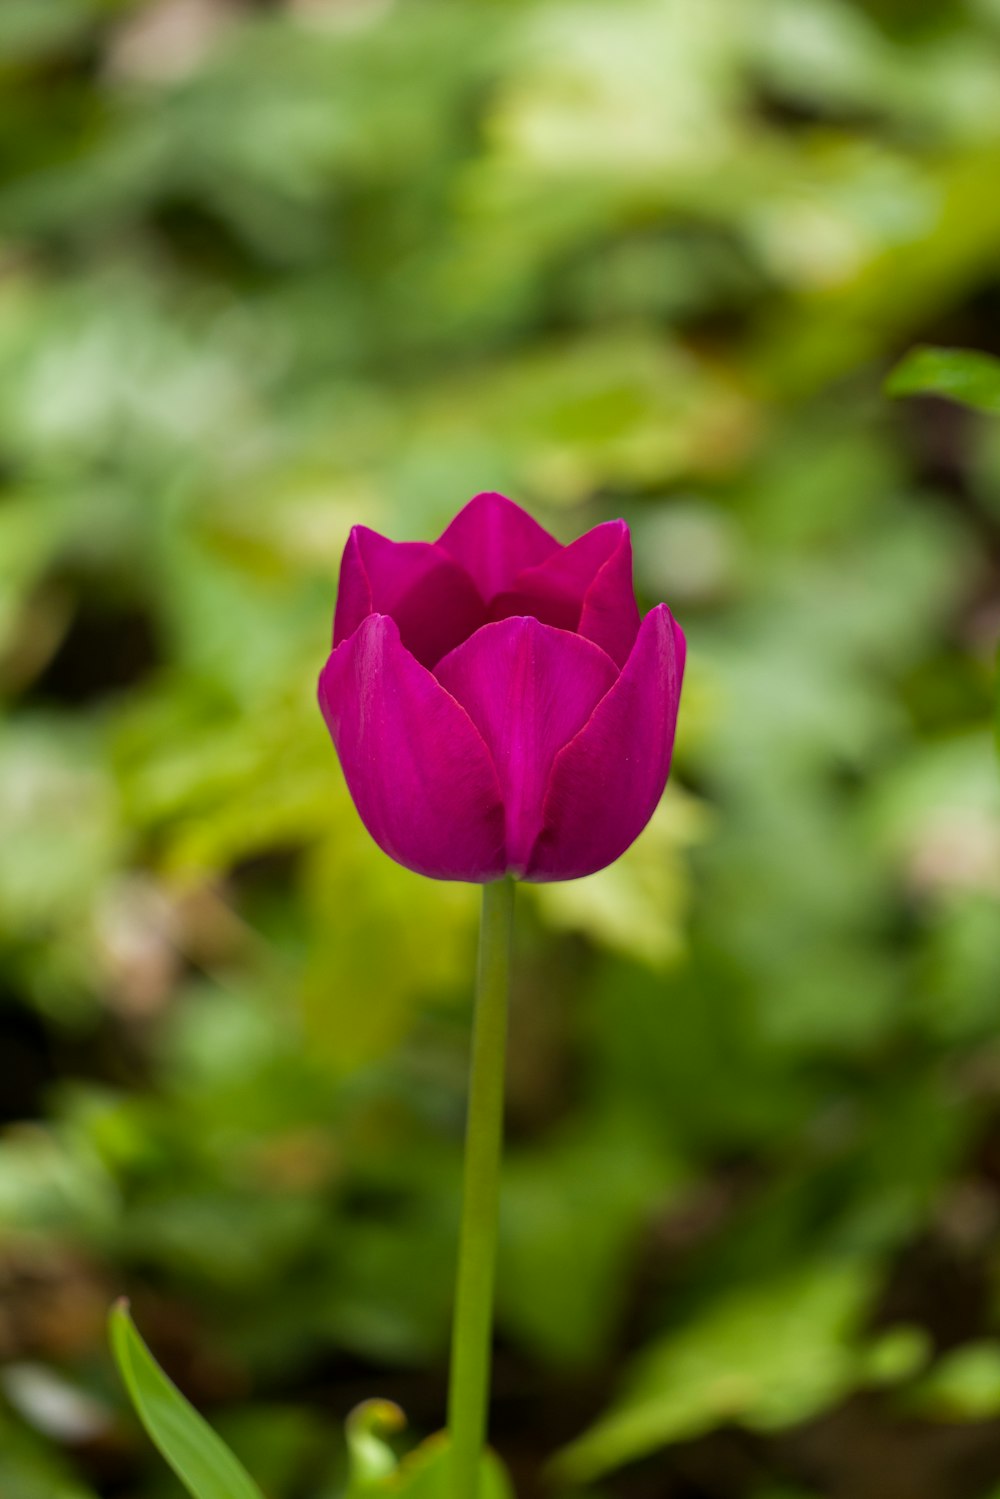 a single pink tulip in a field of green grass